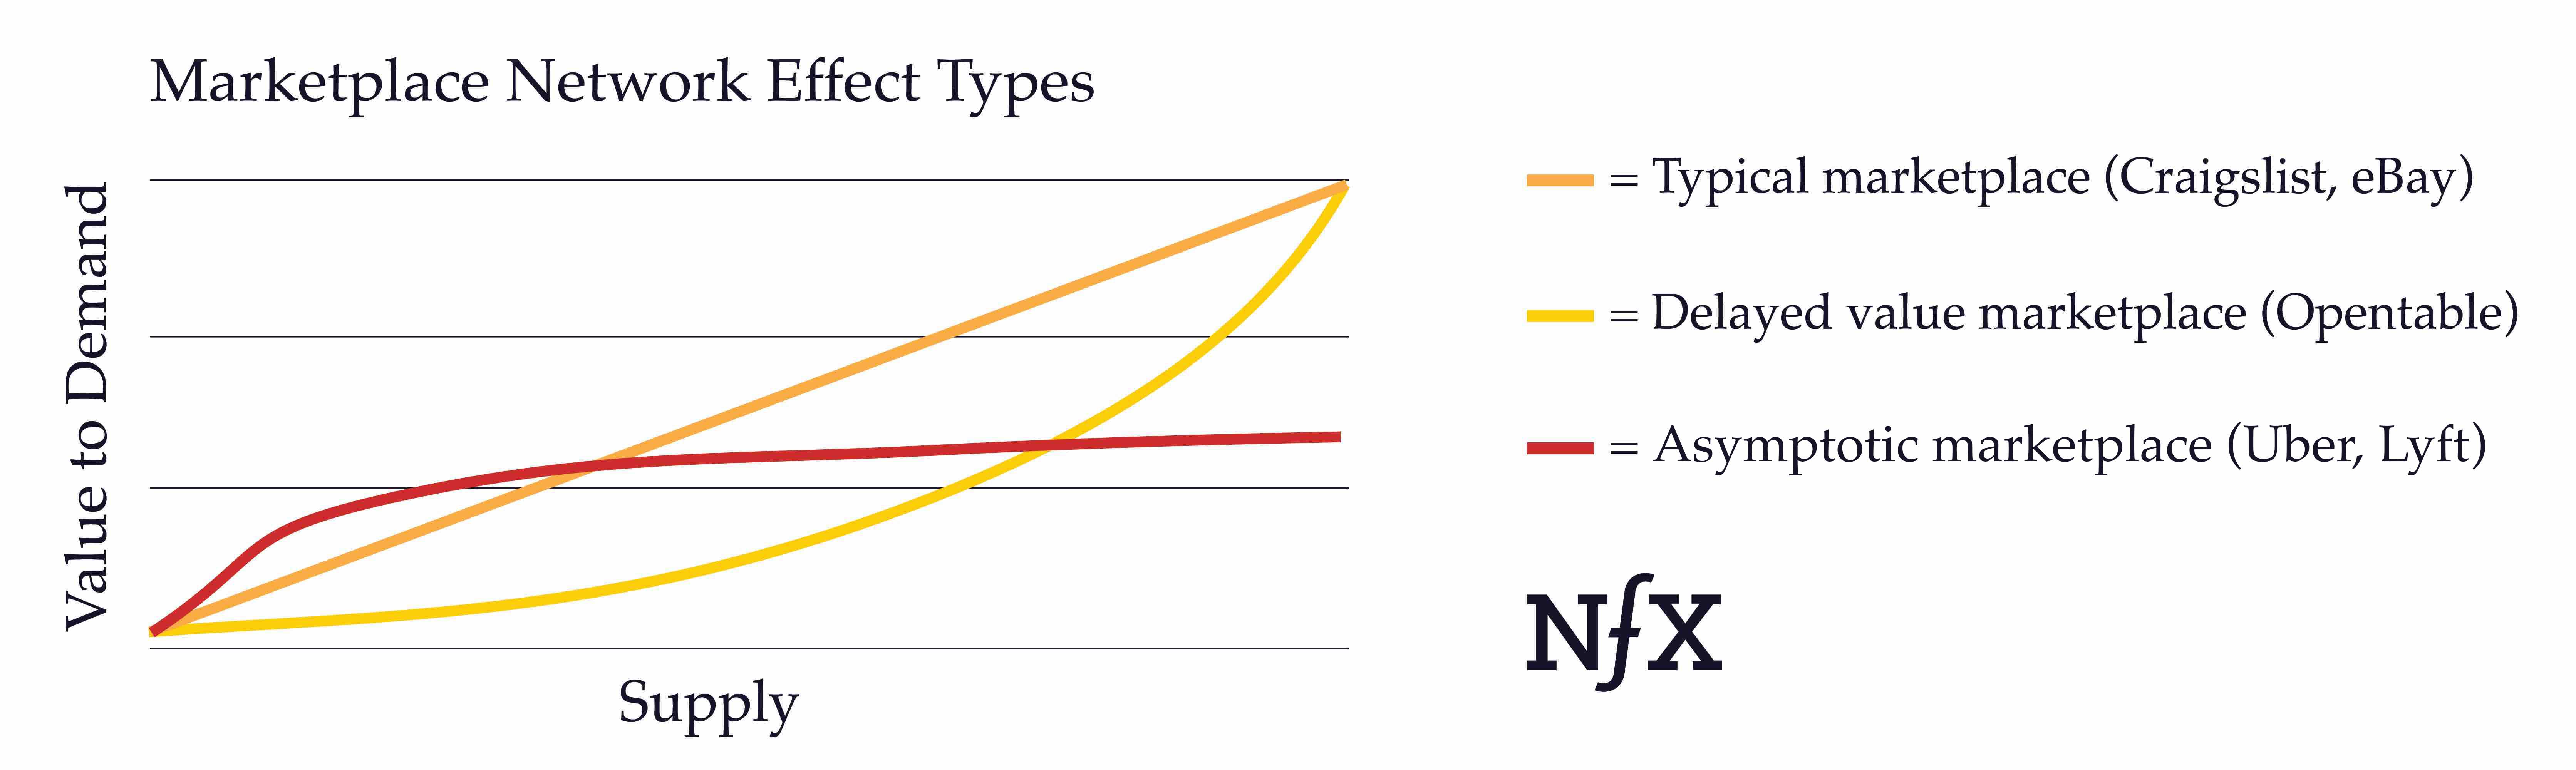 Types of Network Effects Chart